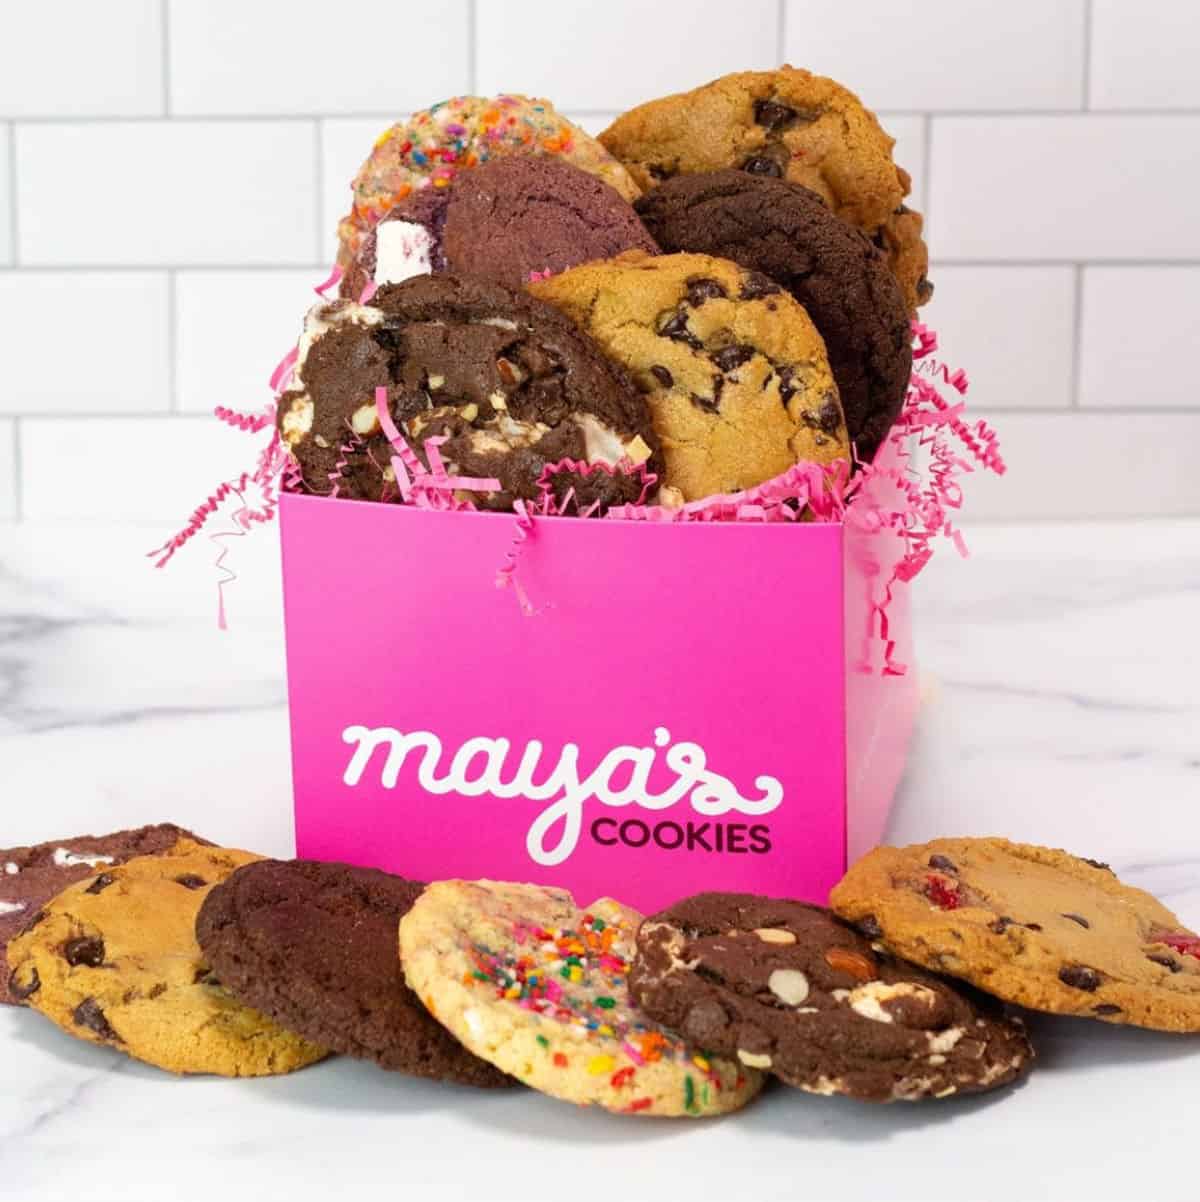 Pink box with the Maya's Cookies logo on it, with cookies sticking up out of it and laying around it.